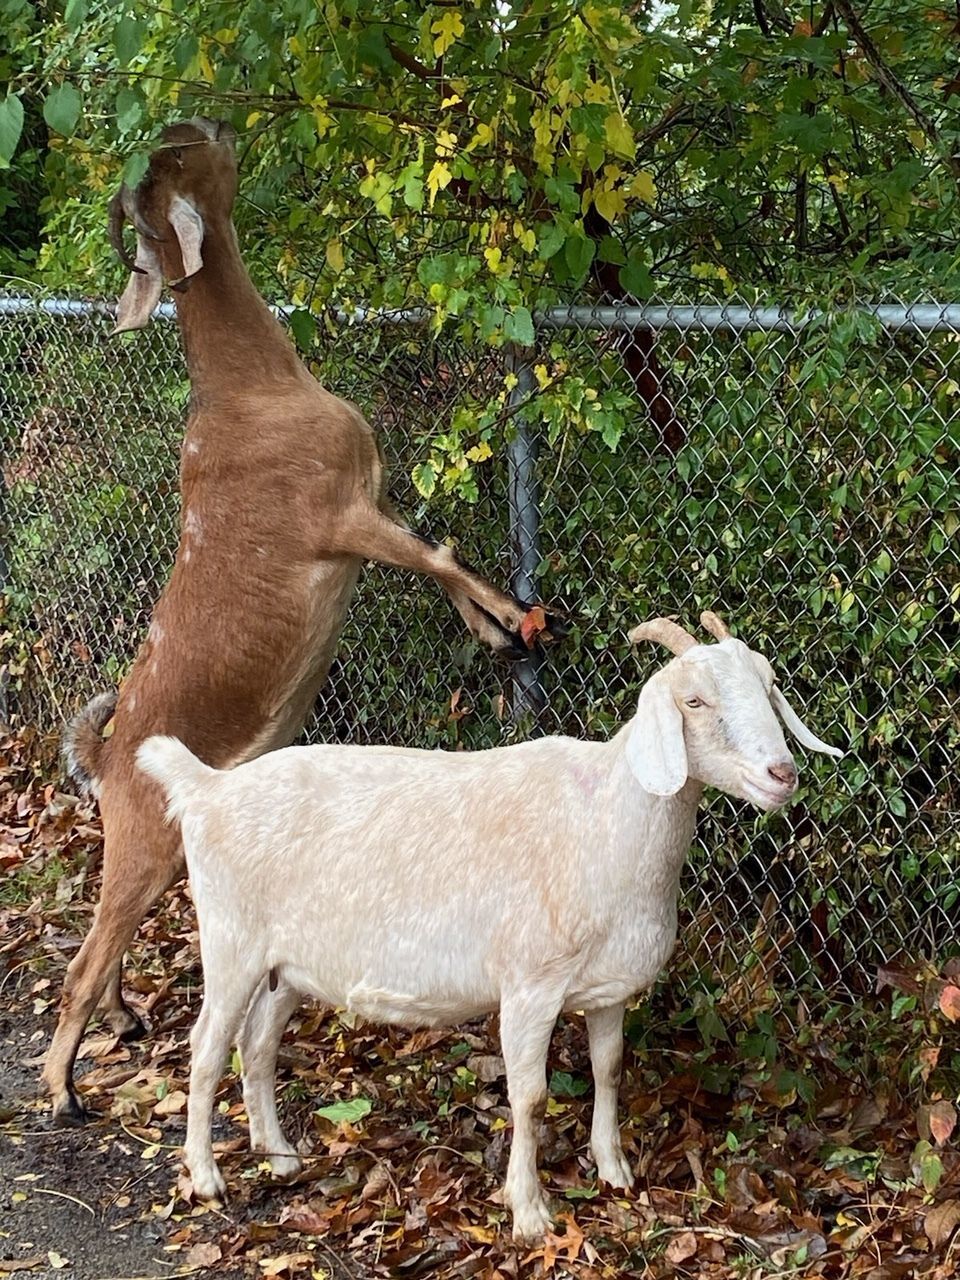 Two goats. One goat is eating leaves